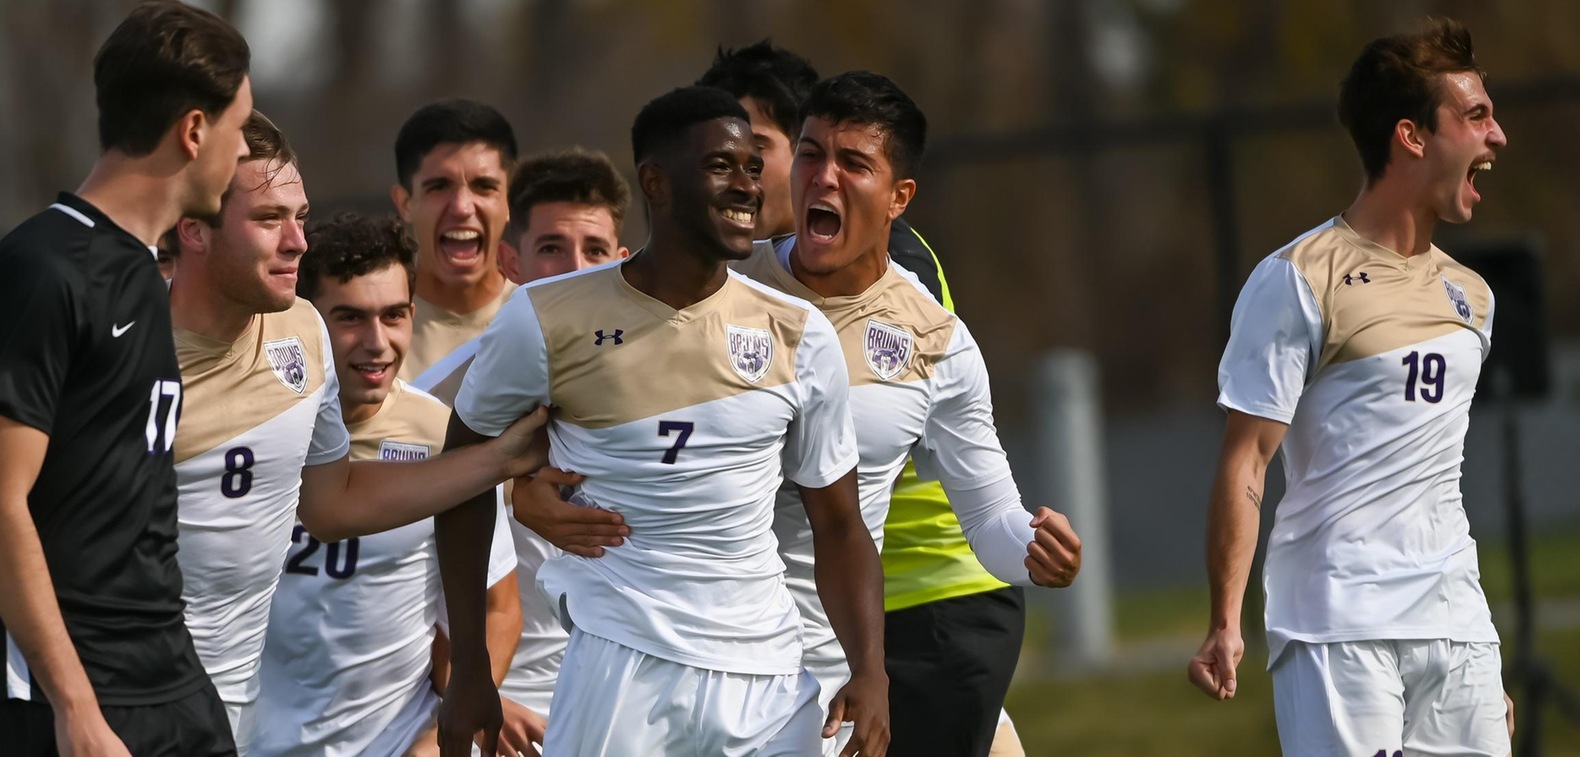 Sissoko strike punches BU ticket to CAC Finals, Nationals